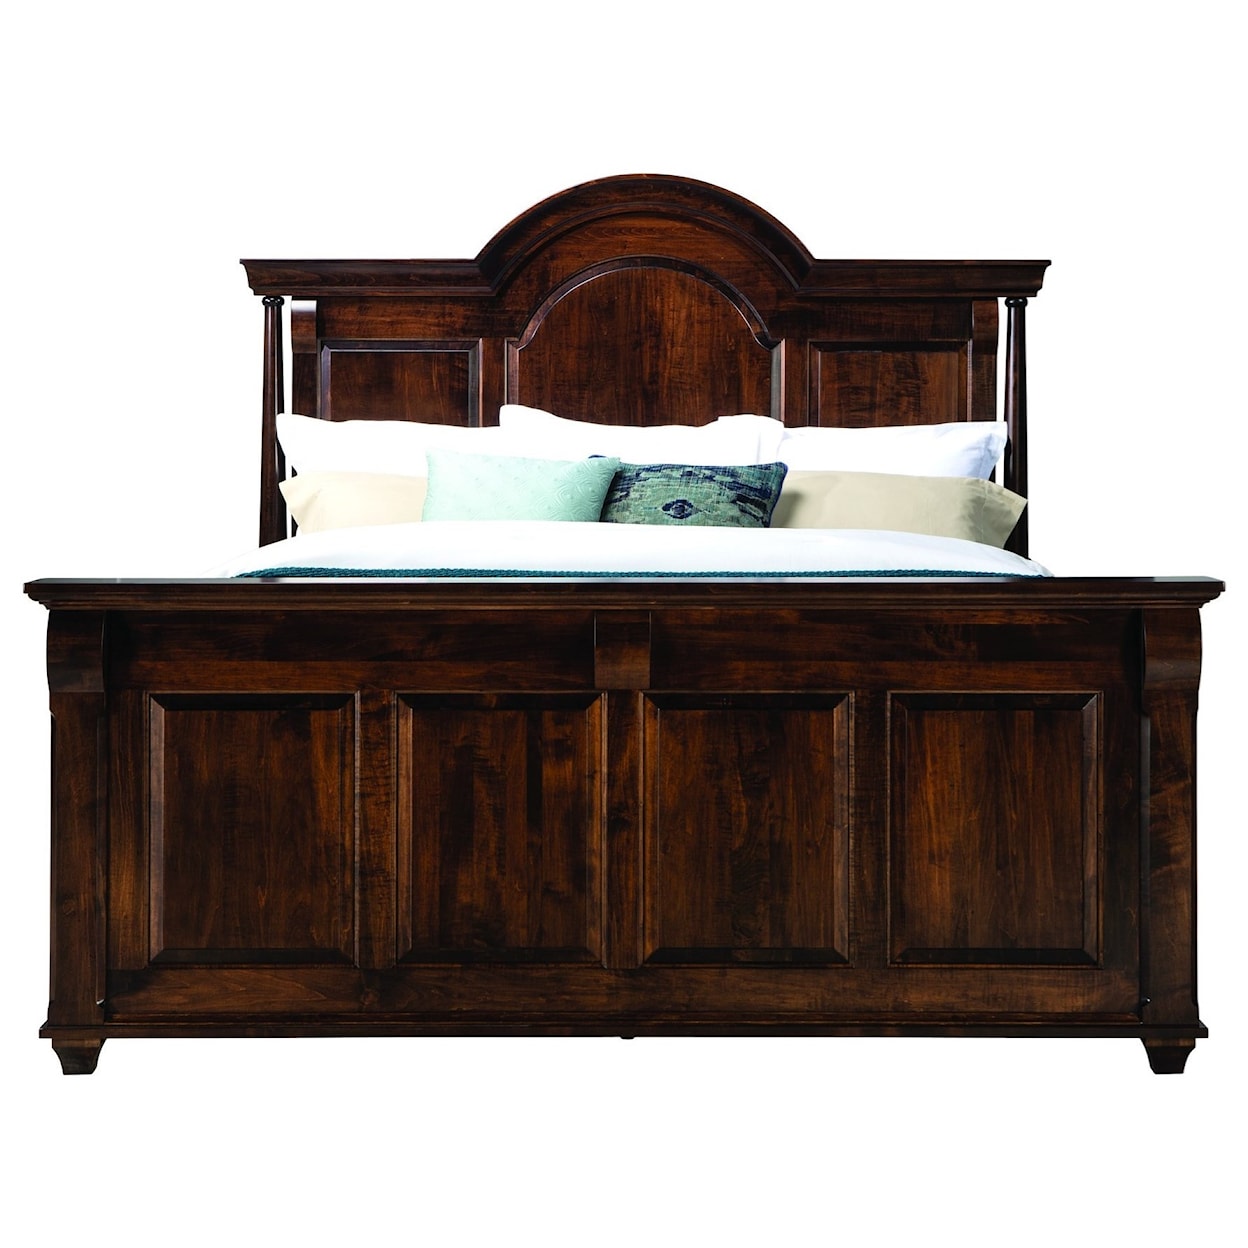 Mavin Bartletts Island Queen Arched Panel Bed